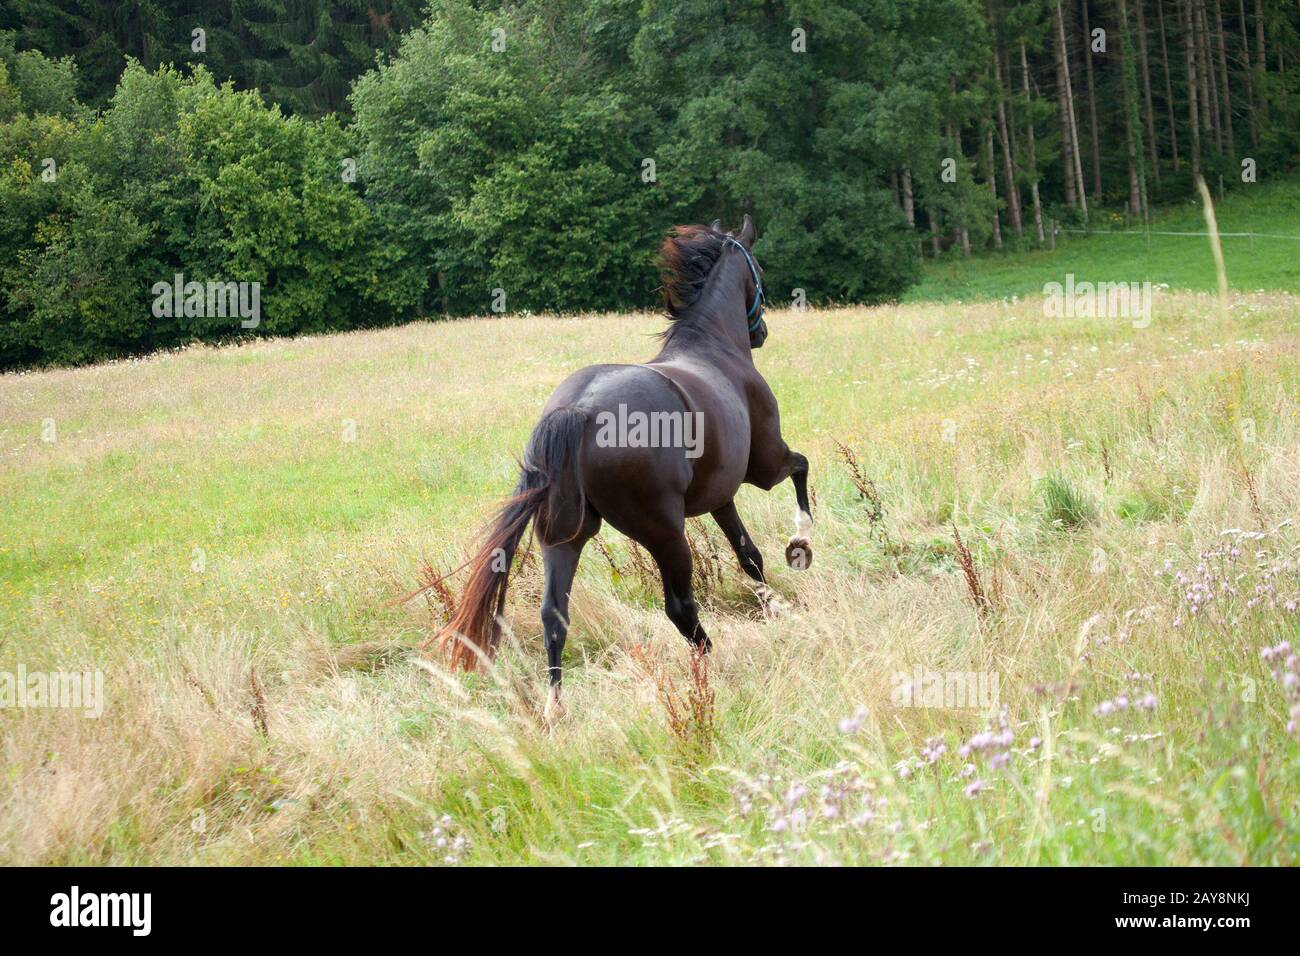 horse galopping free in meadow rear view Stock Photo